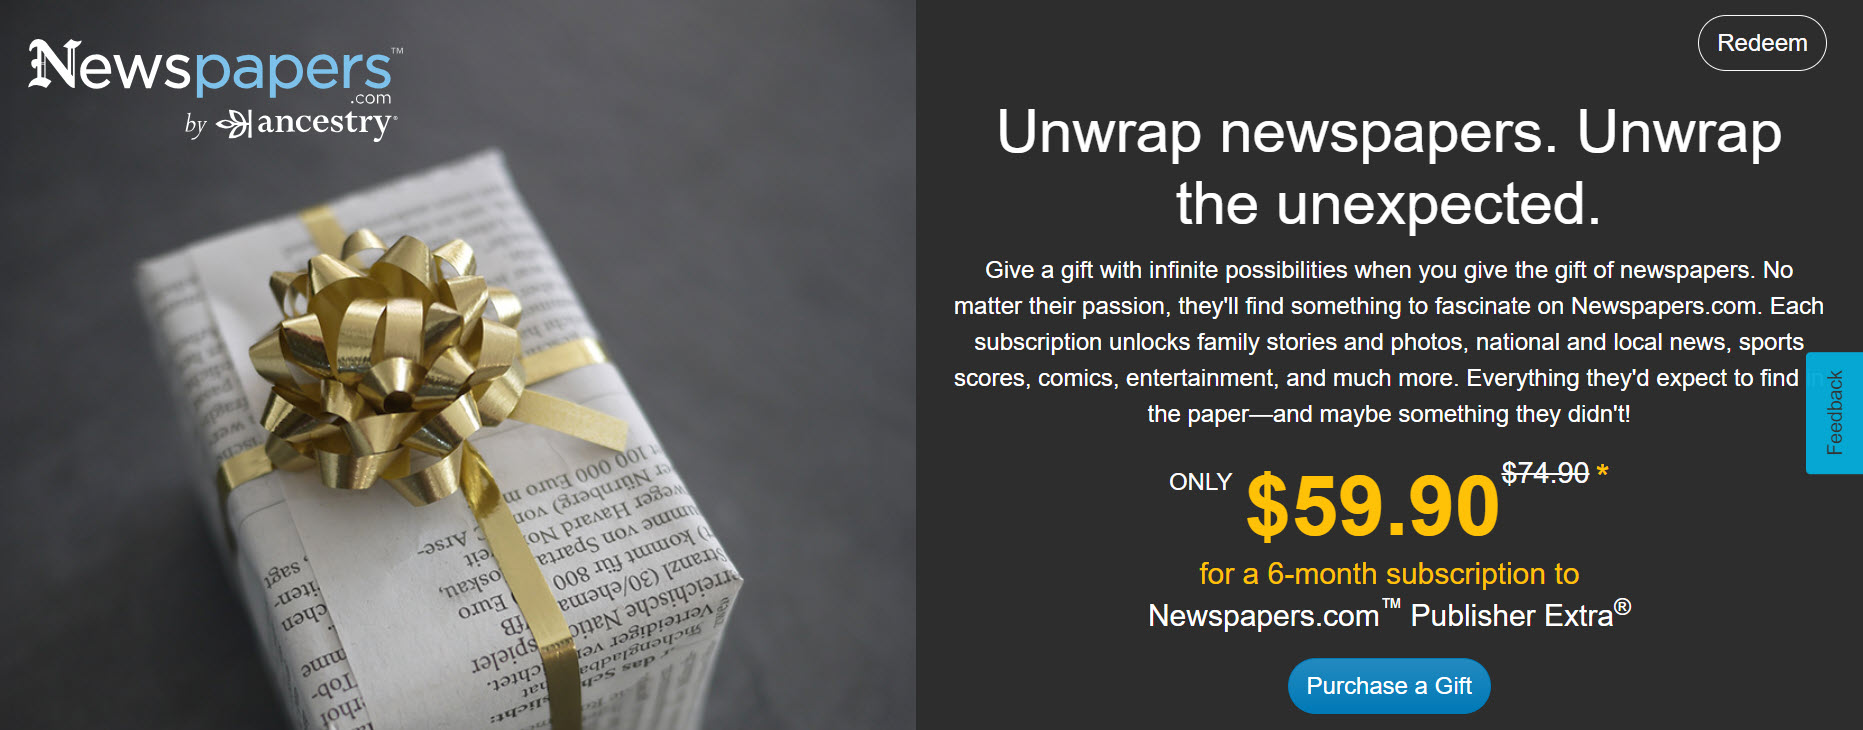 Holiday Shopping: Newspapers.‌com™ - Unwrap newspapers. Unwrap the unexpected.